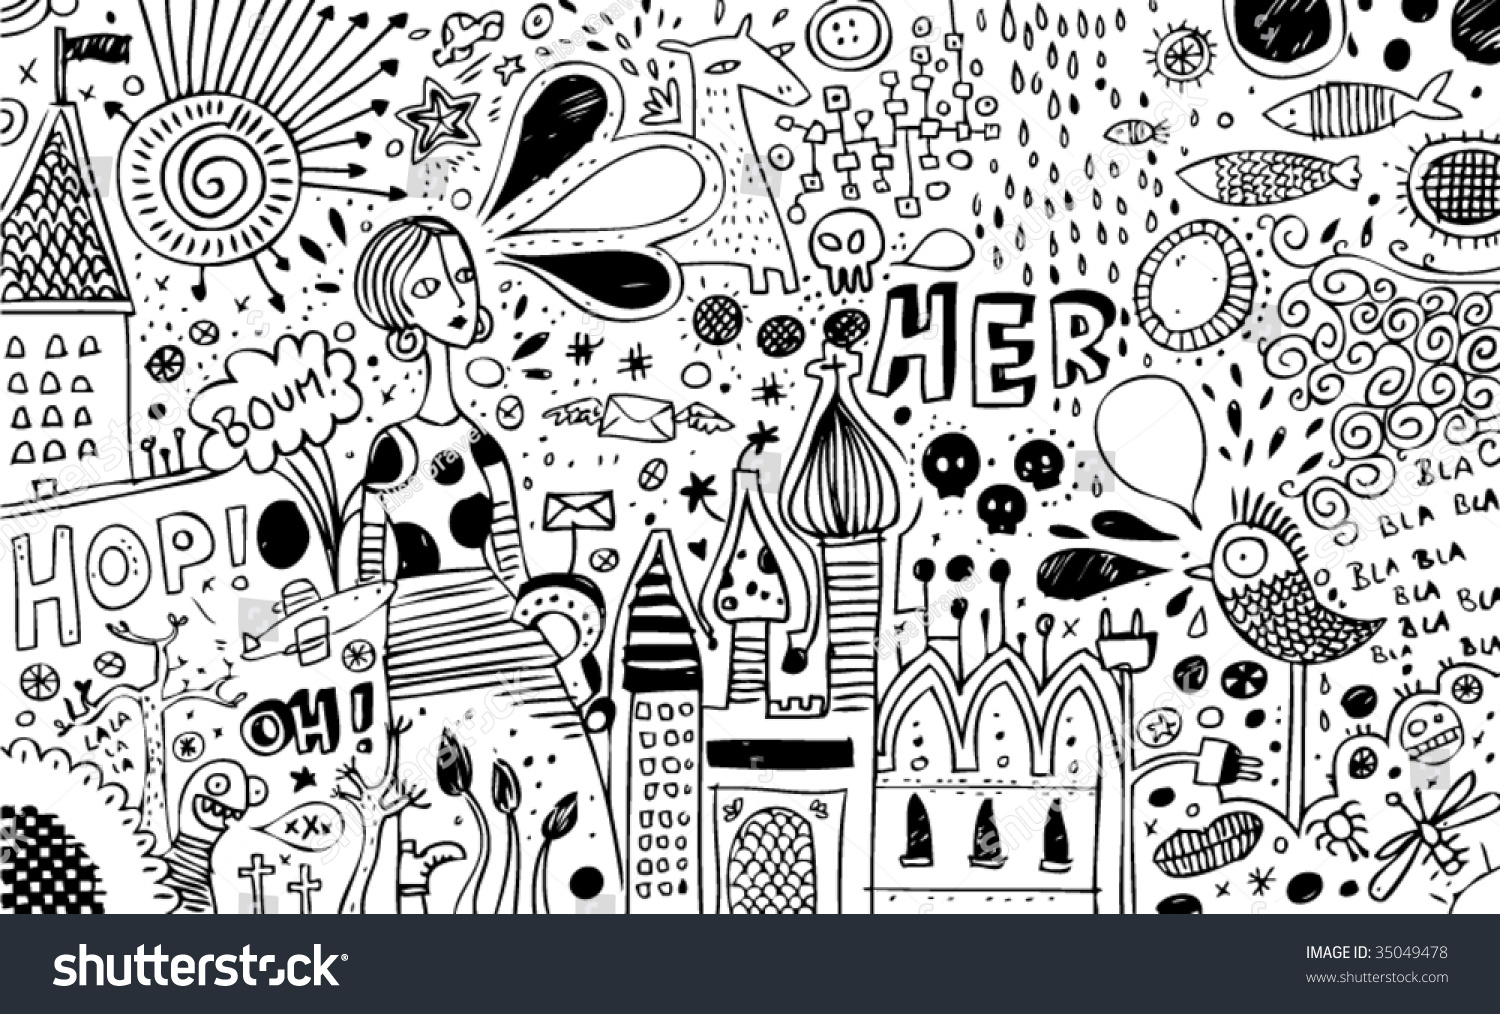 Full Page Of B/W Doodles Stock Vector 35049478 : Shutterstock